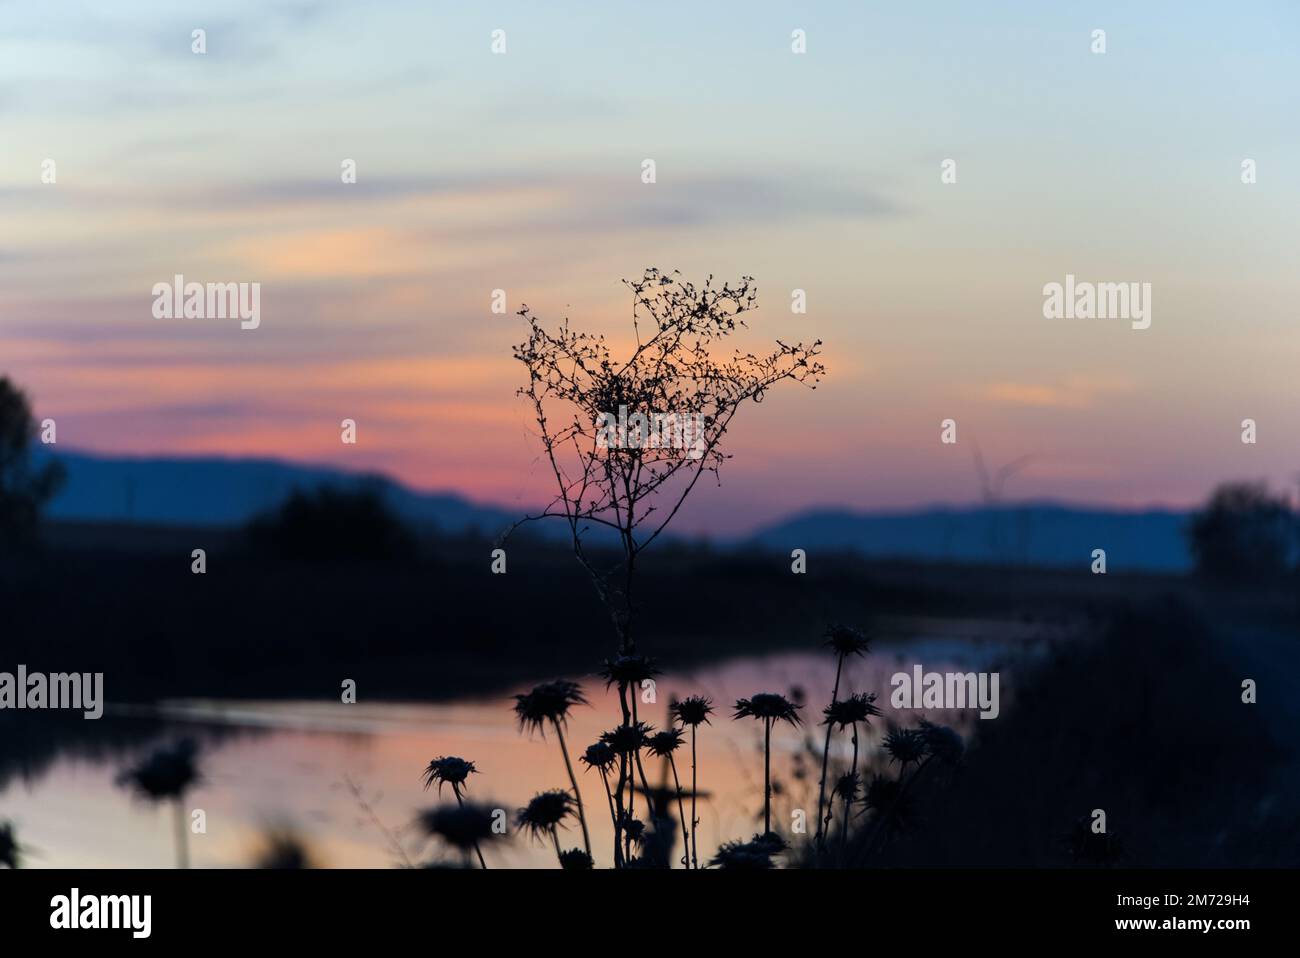 Silhouette of flowers at the bank of a canal at the sunset. Stock Photo